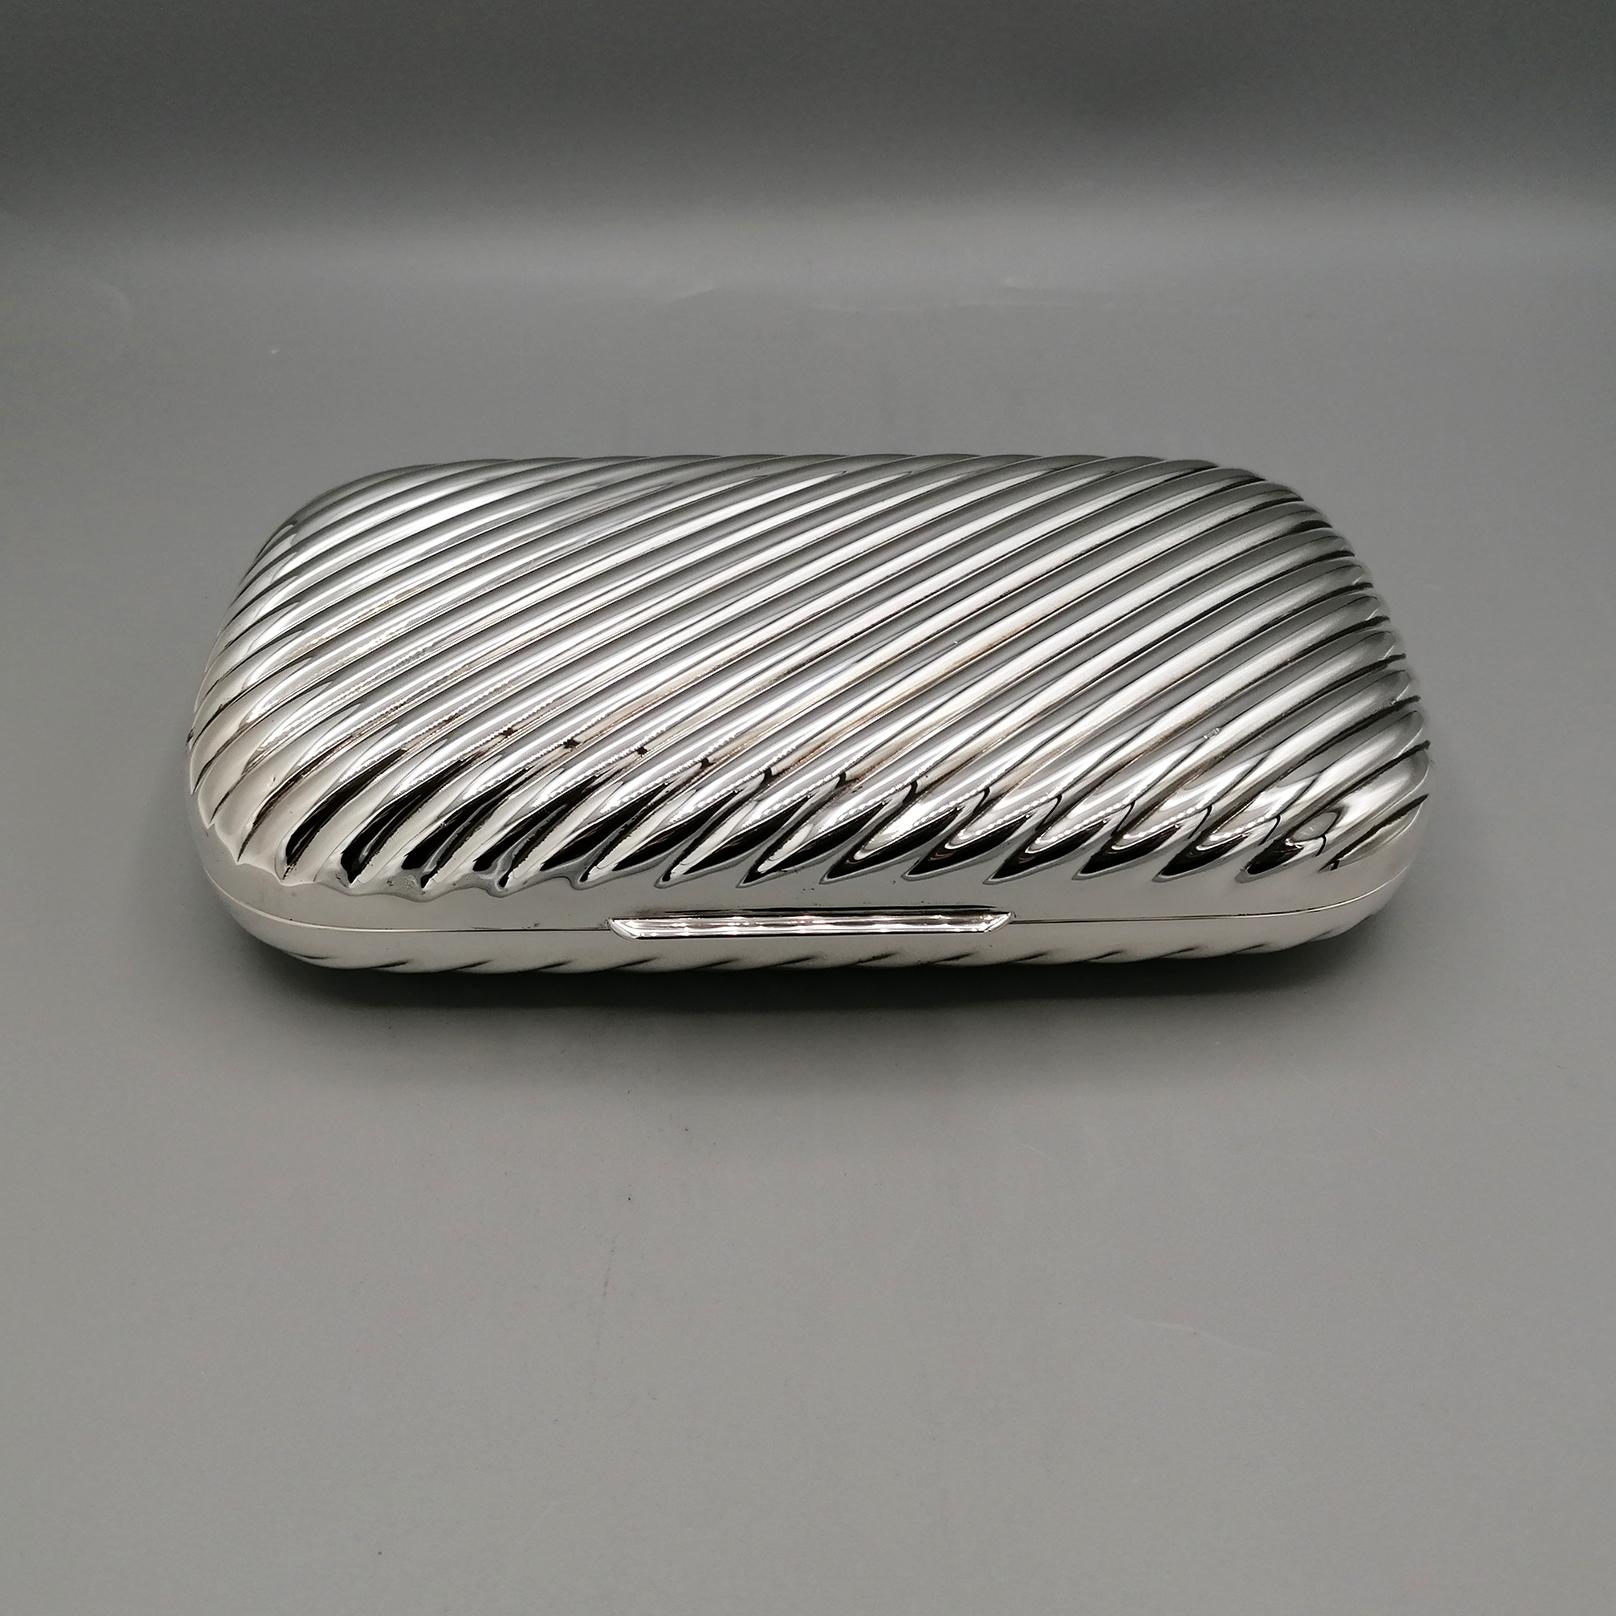 Hinged Sterling Silver Box.
The box is embossed and chiselled with diagonal lines, leaving the central part smooth and shiny to interpose a different space between the workings.
The shape is oblong, with the shape of a 